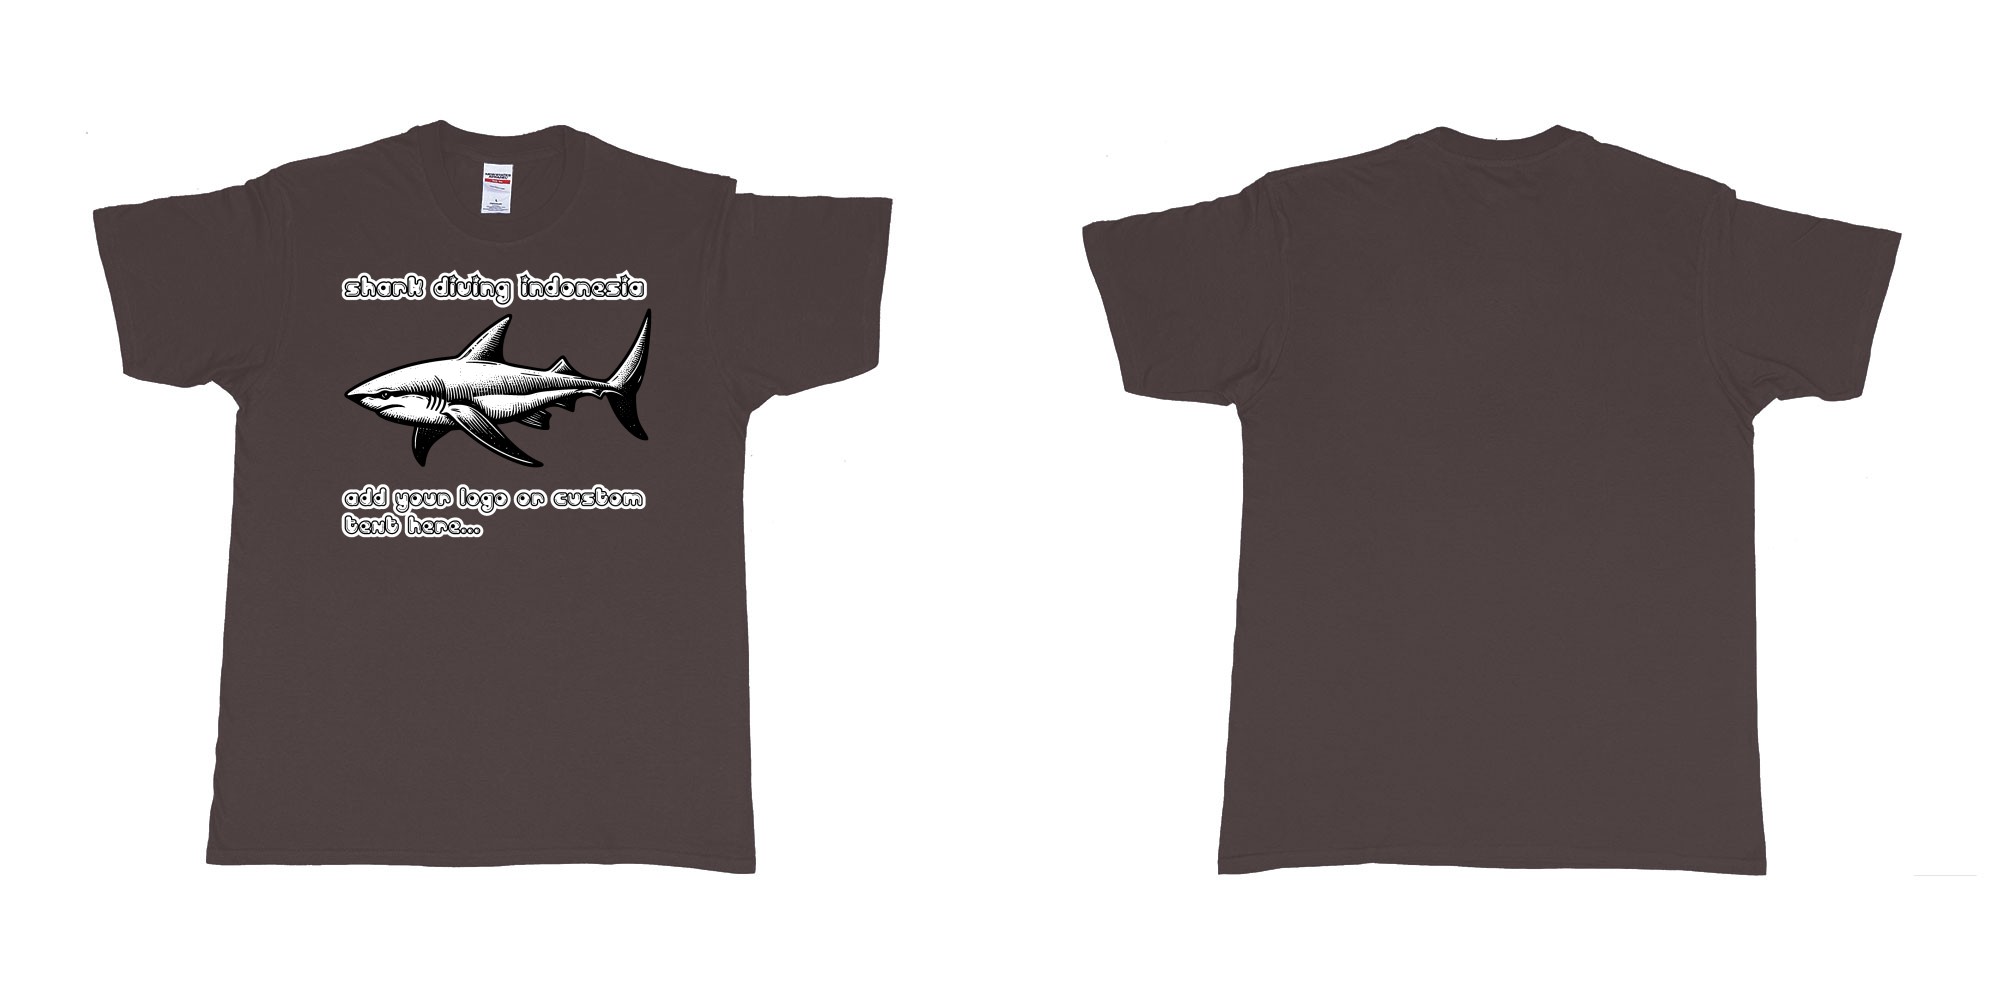 Custom tshirt design shark diving indonesia add own logo text tshirt print in fabric color dark-chocolate choice your own text made in Bali by The Pirate Way